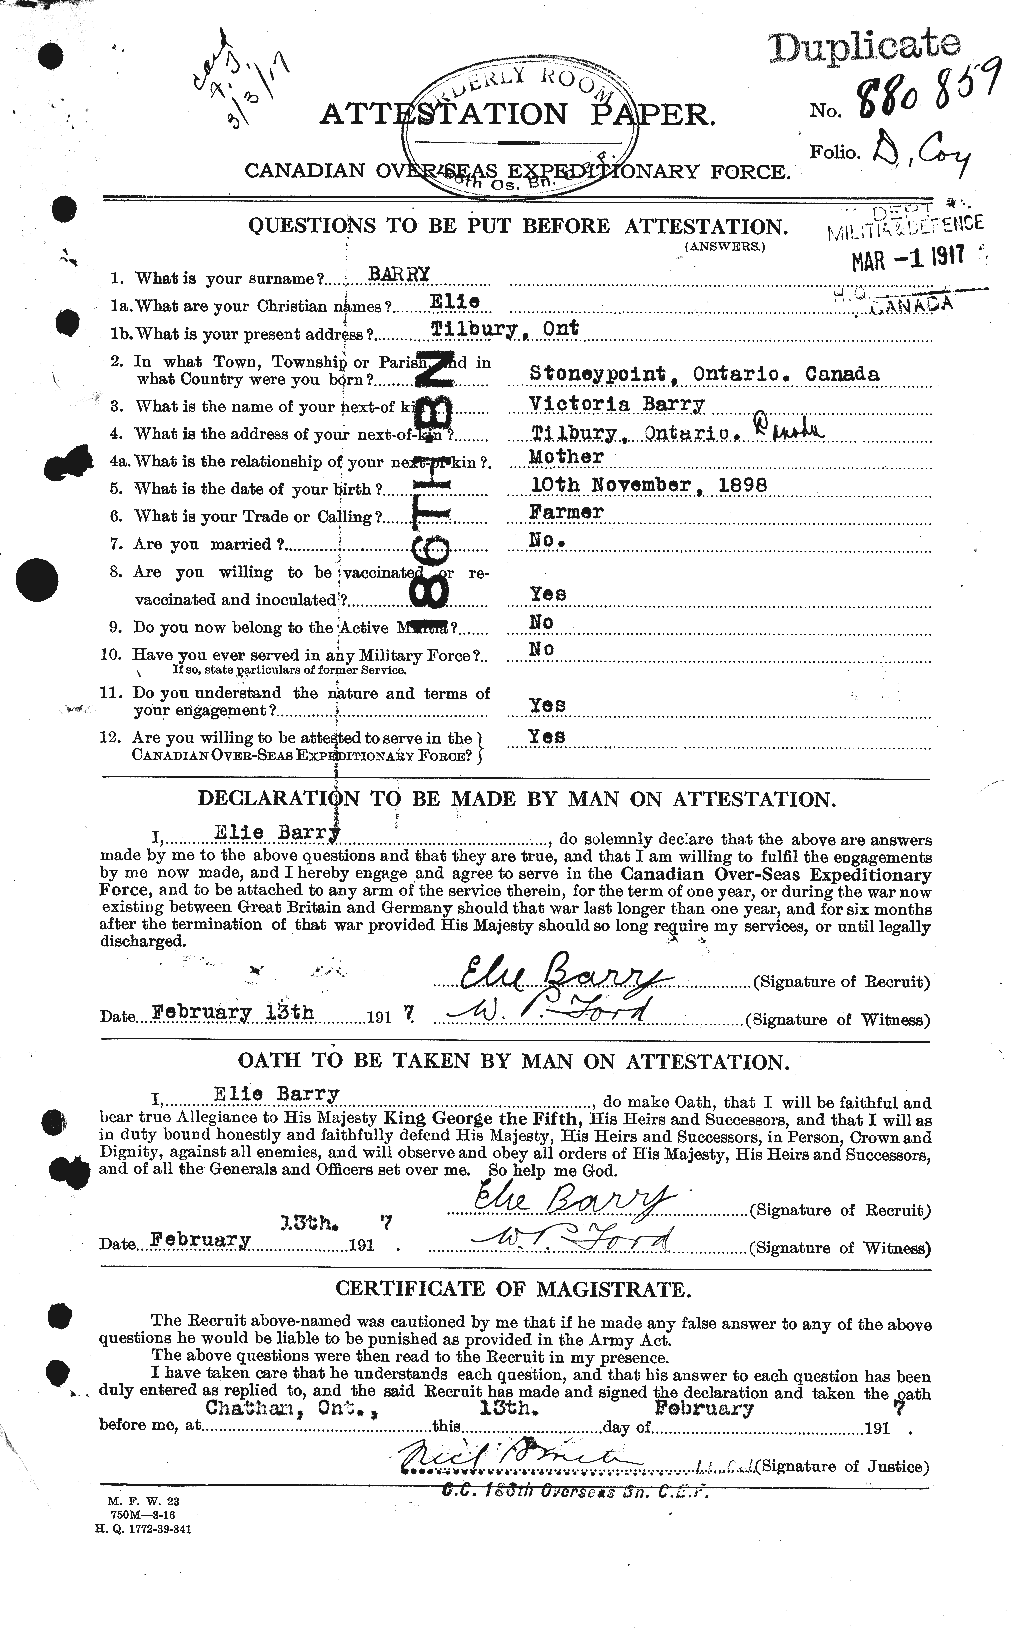 Personnel Records of the First World War - CEF 222195a